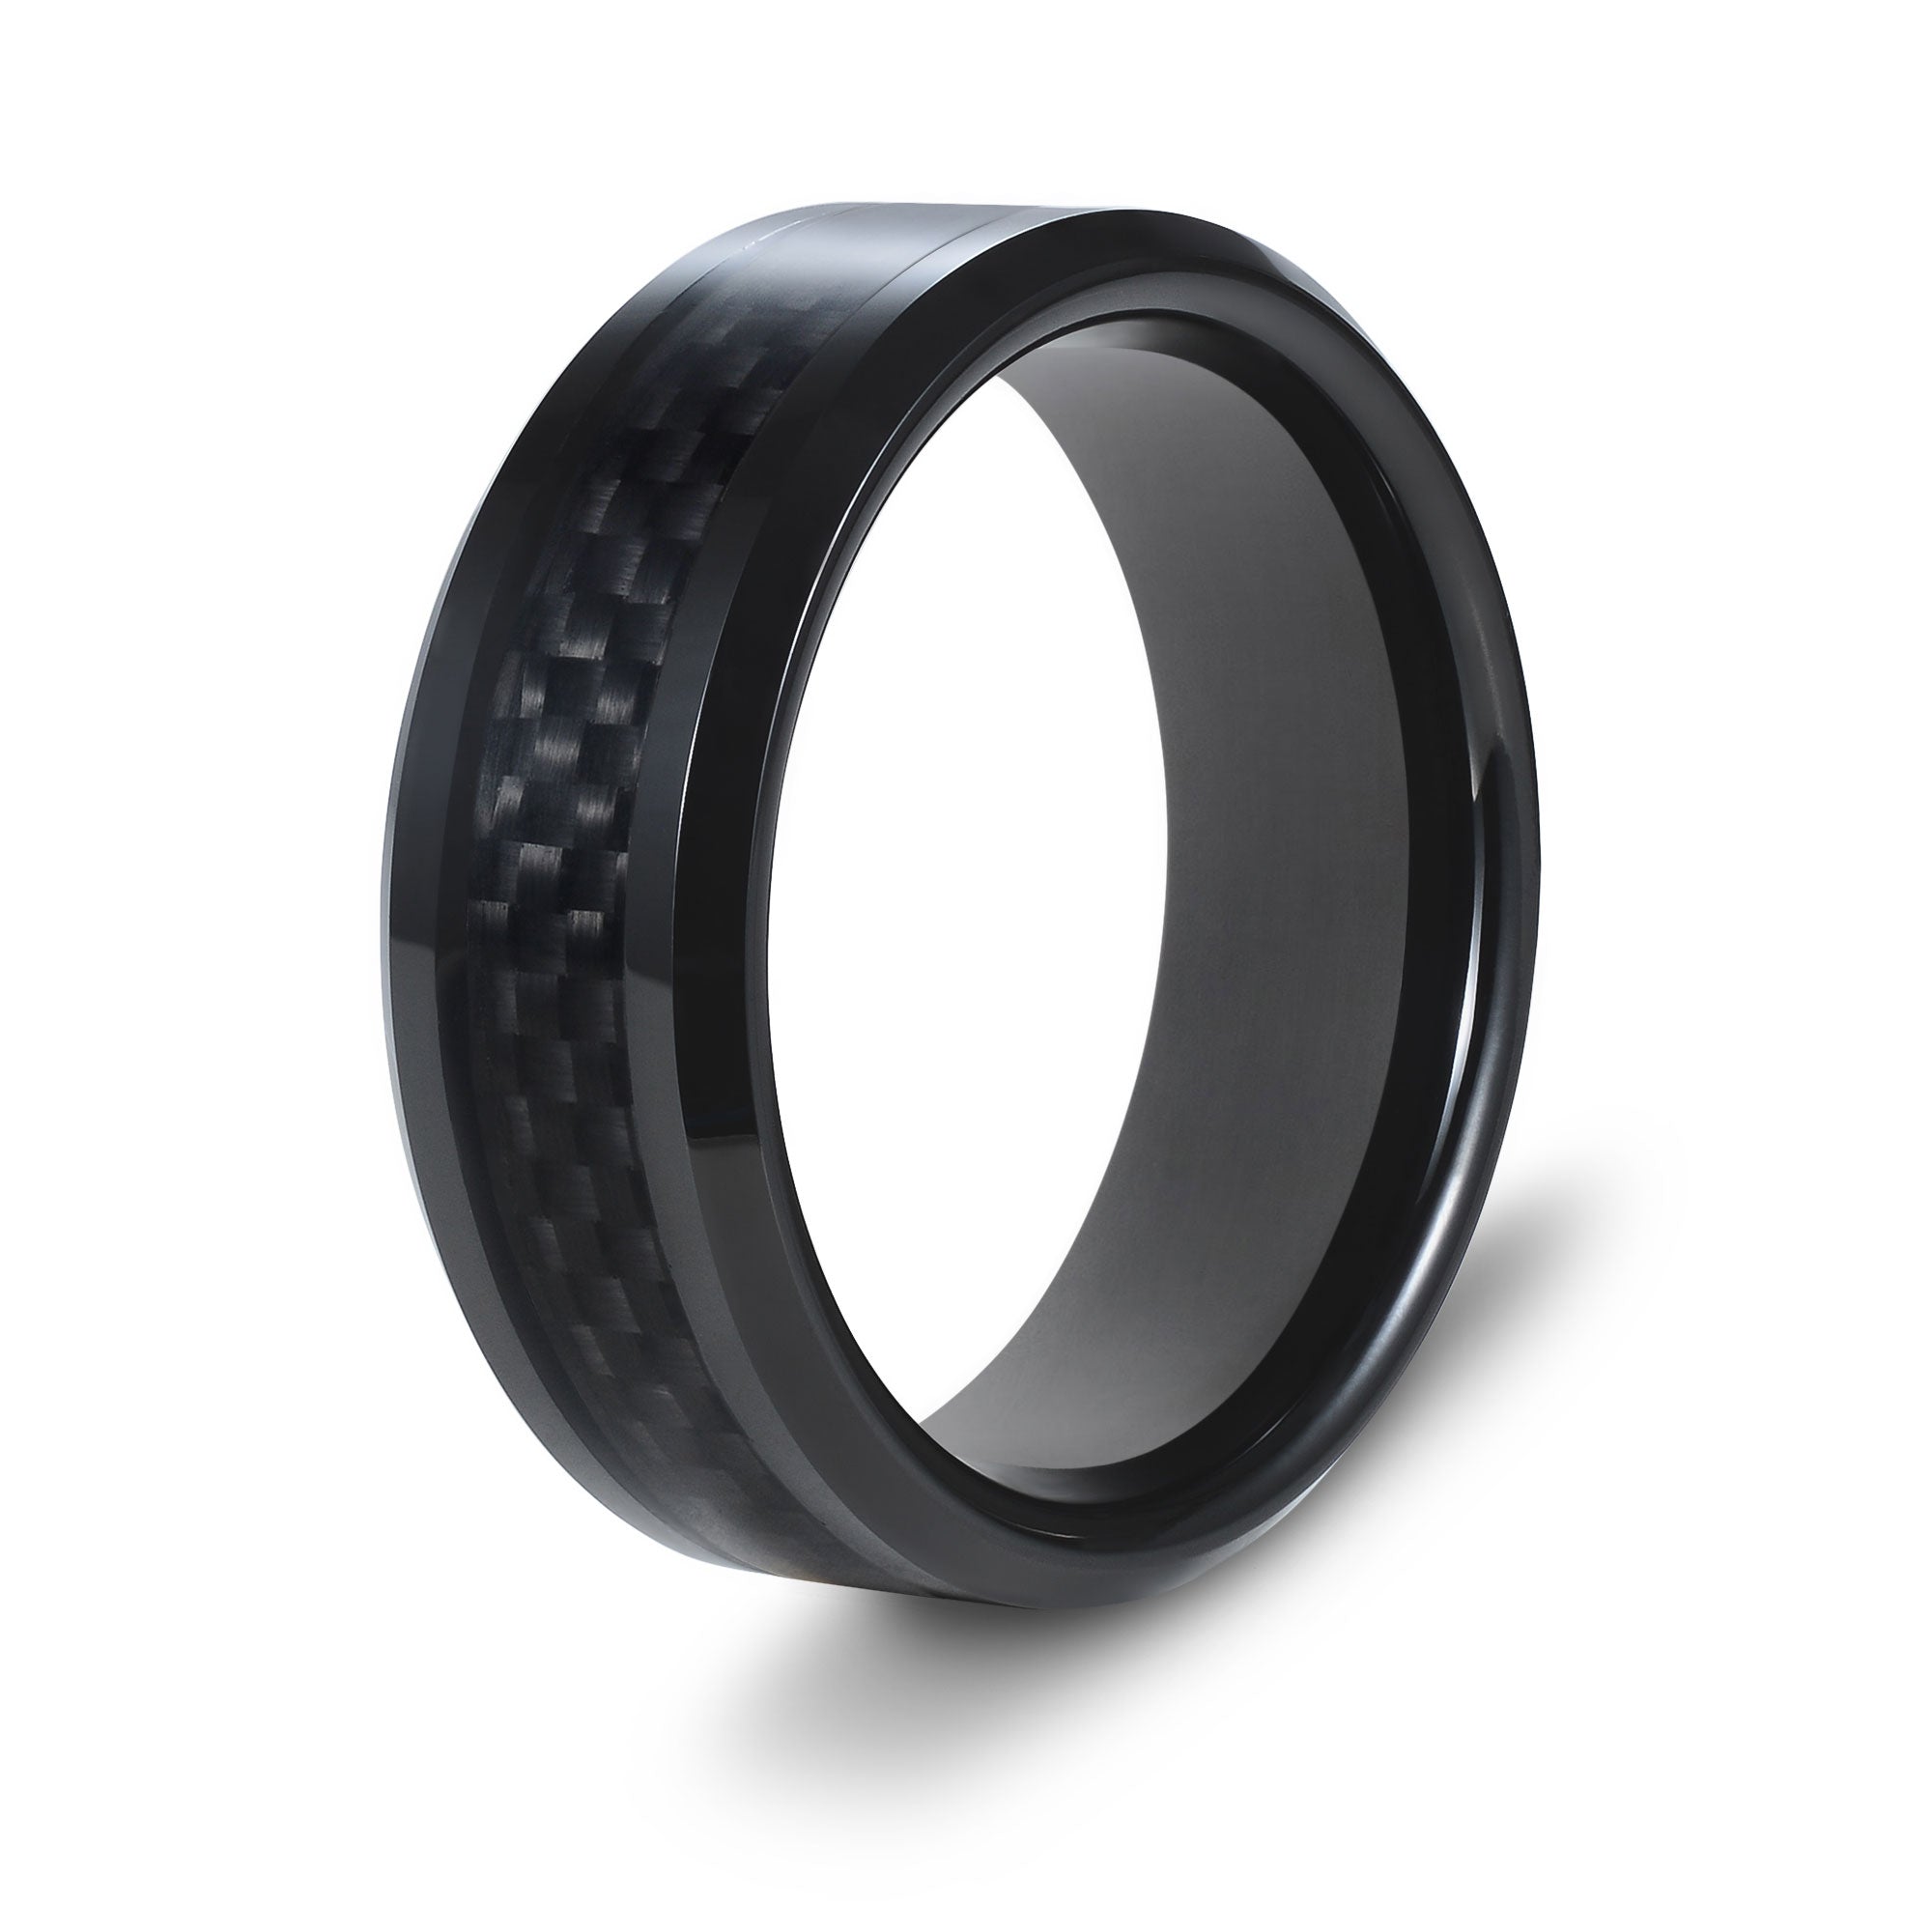 The Overlord - Black Carbon Fibre Tungsten Beveled Ring